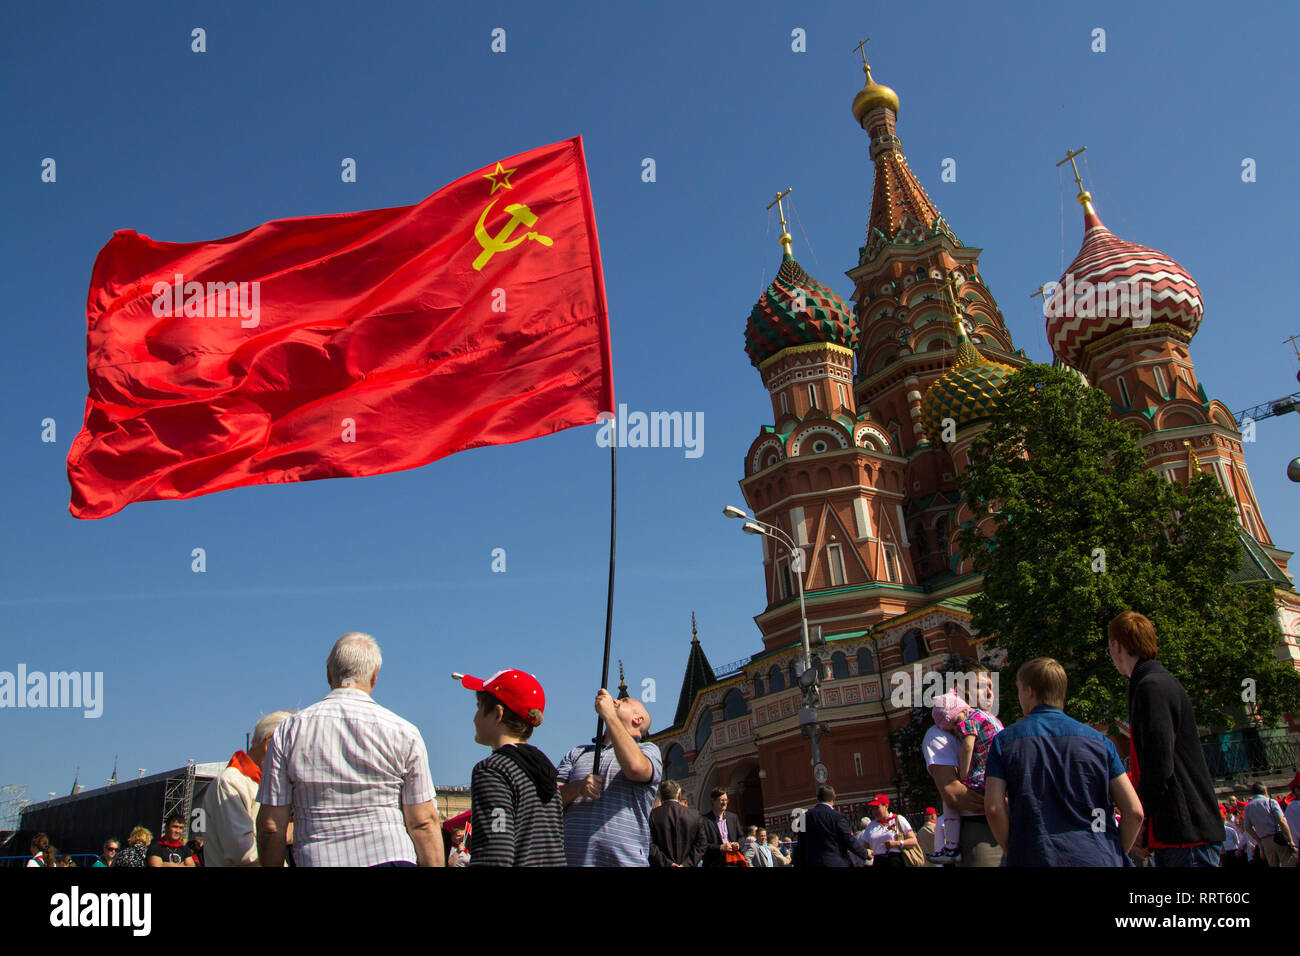 MOSCOW, RUSSIA - MAY 18, 2014: Official ceremony of enrolling school students into the Young Pioneer Organization on Moscow's Red Square. Stock Photo